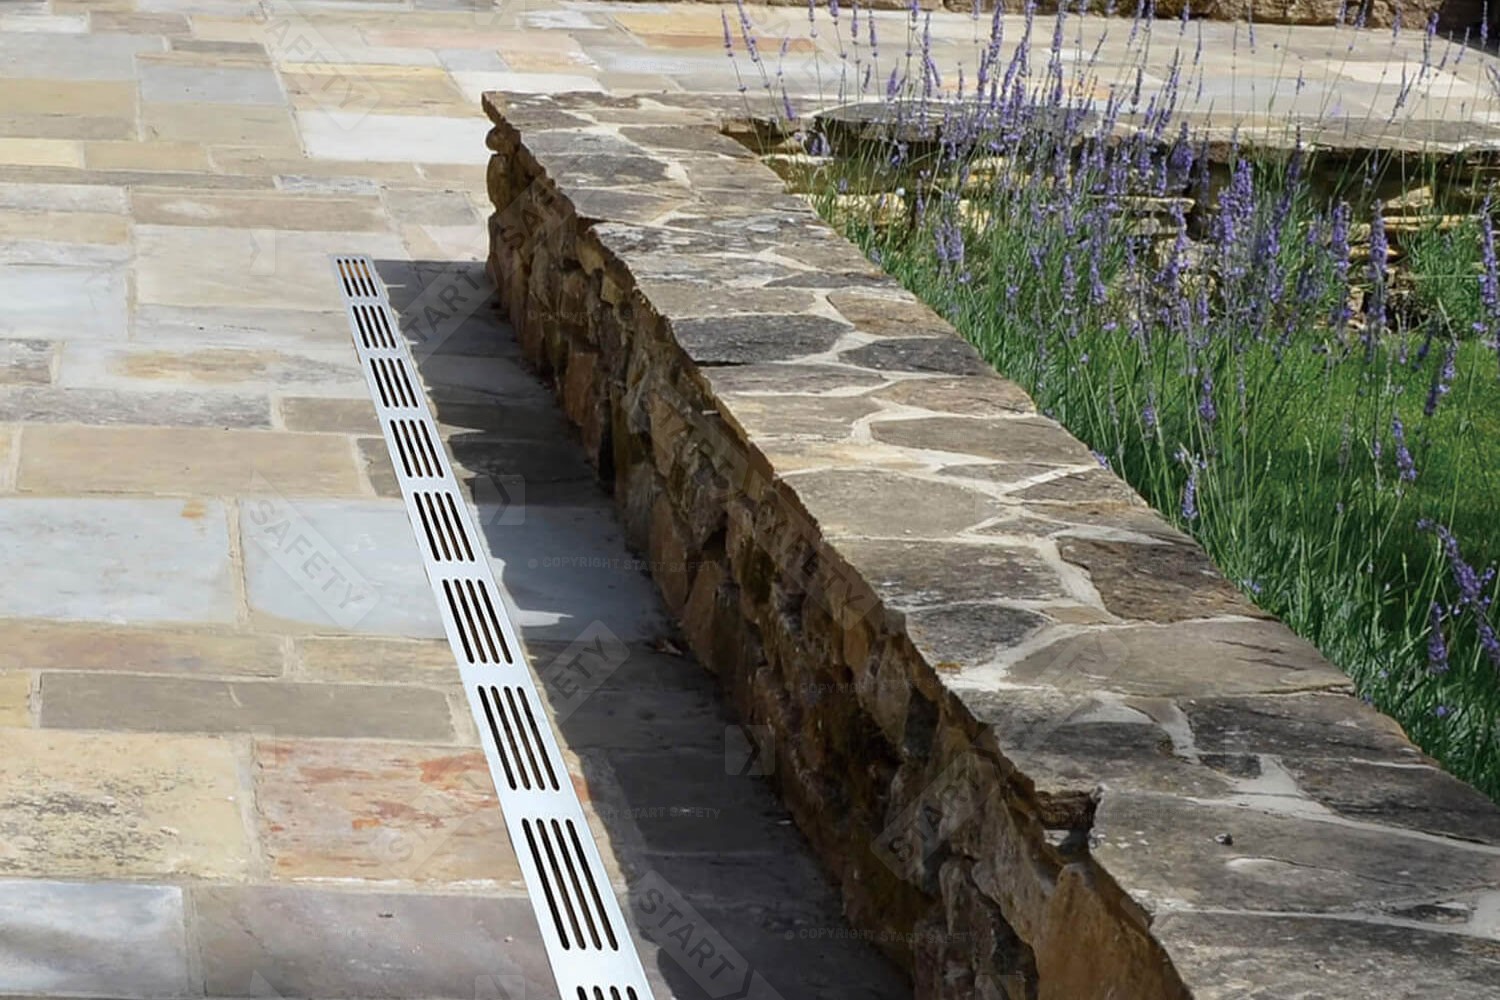 Alusthetic Drainage Channel Installed Aesthetically Against Patio Wall